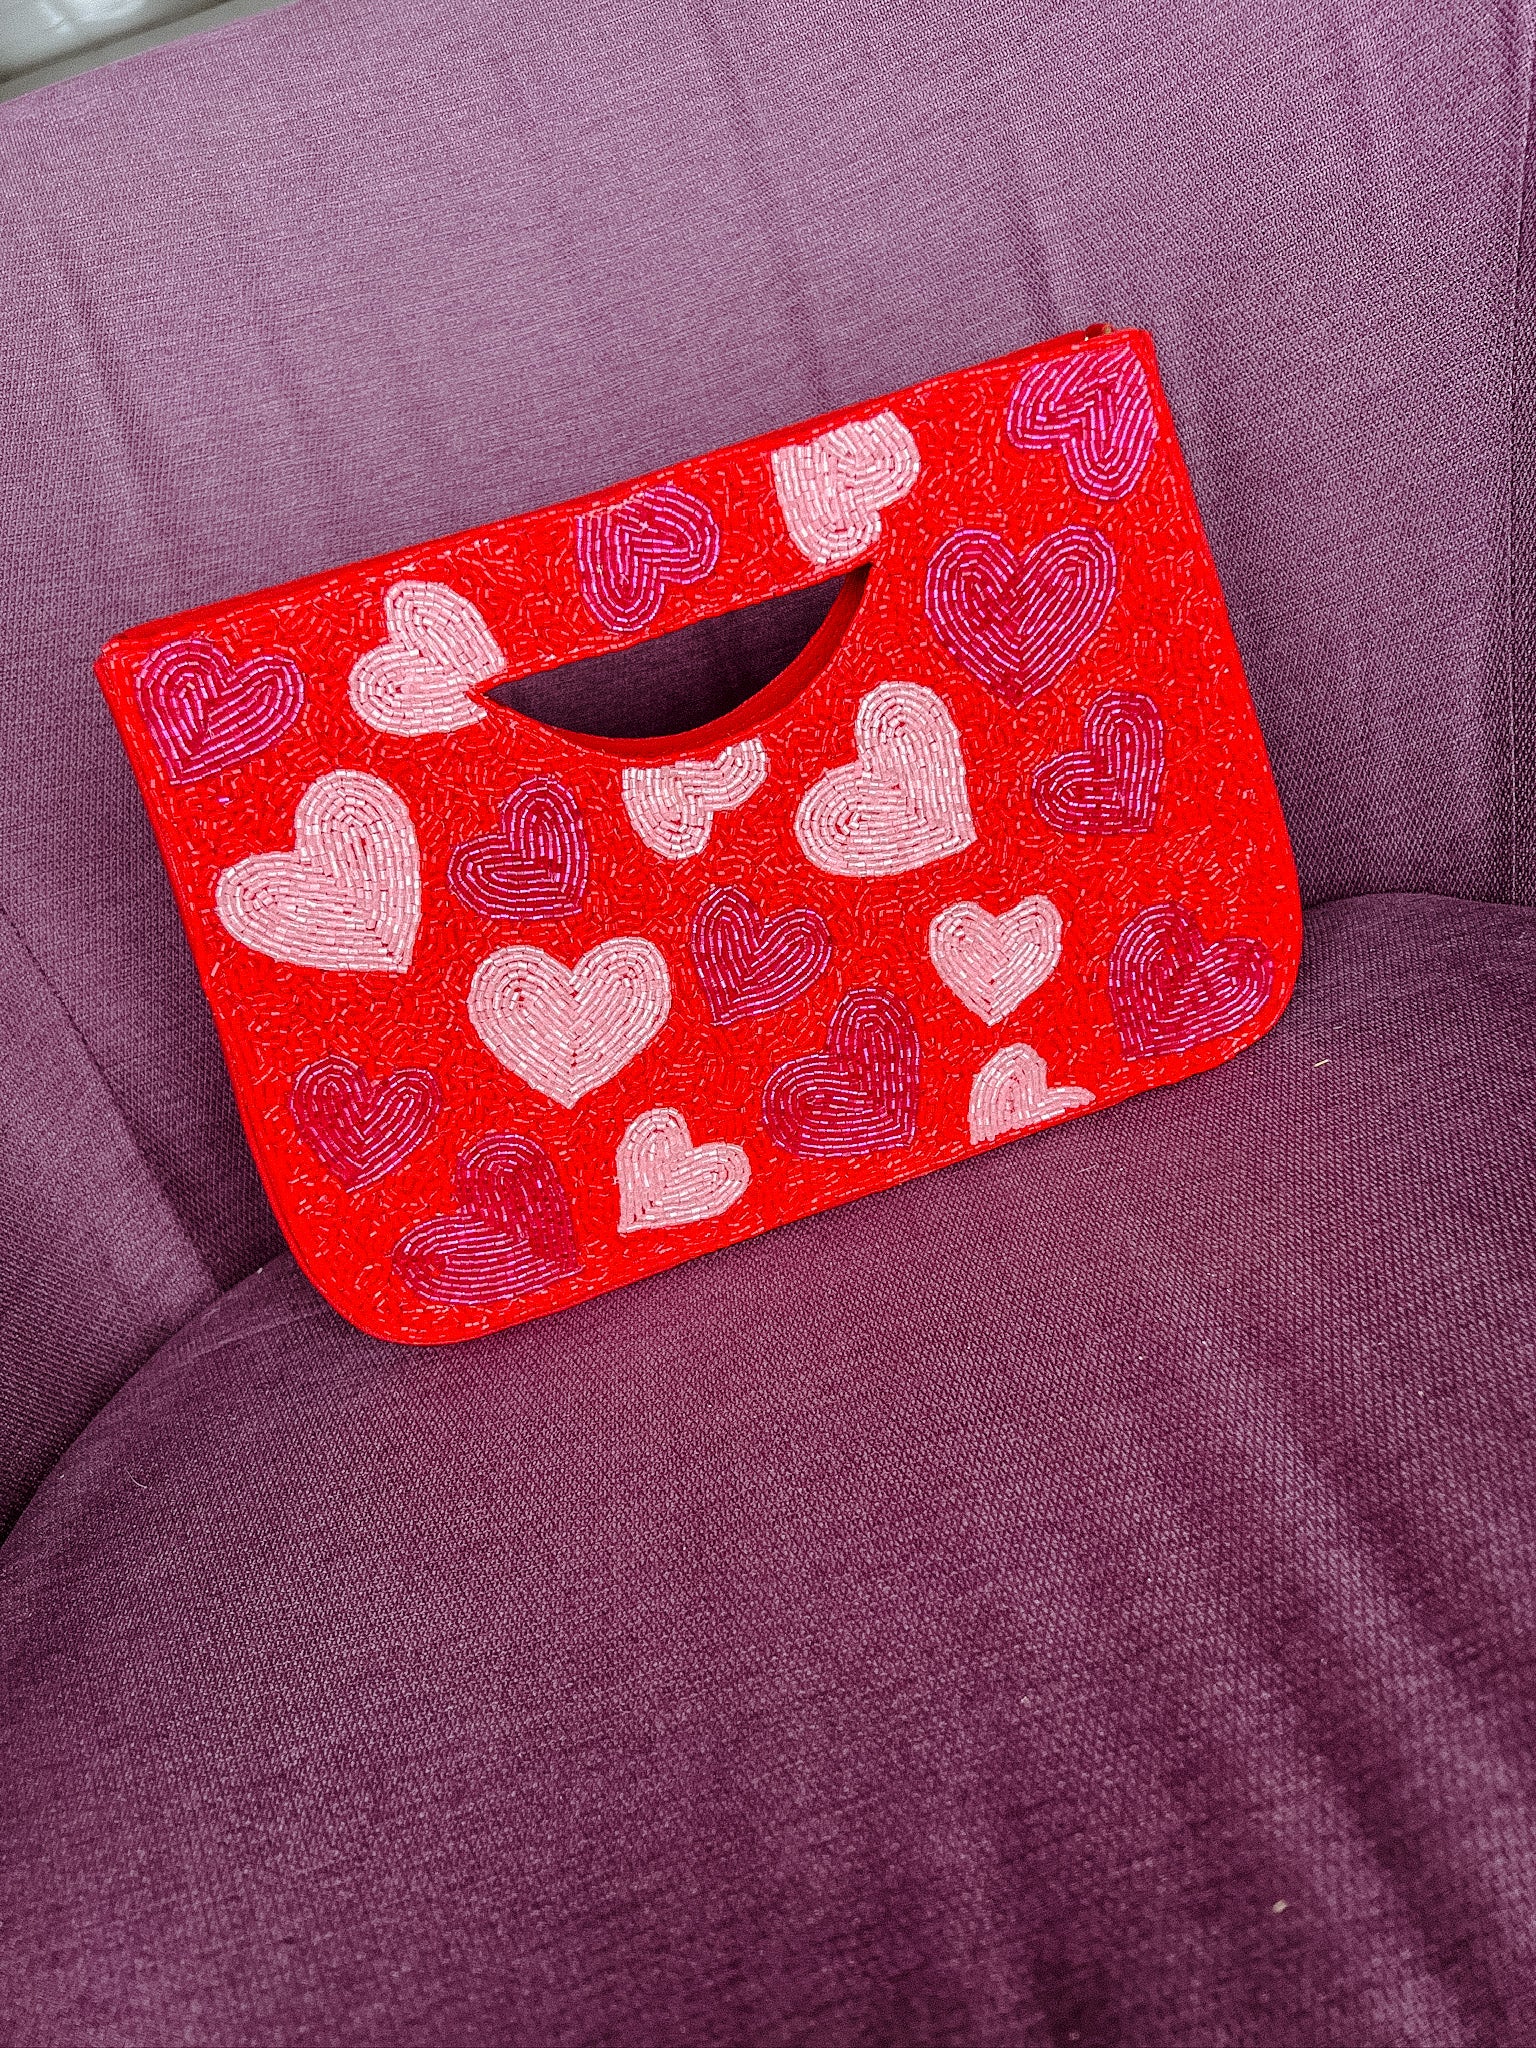 [Treasure Jewels] Roses Are Red Heart Clutch - Red + Fuchsia